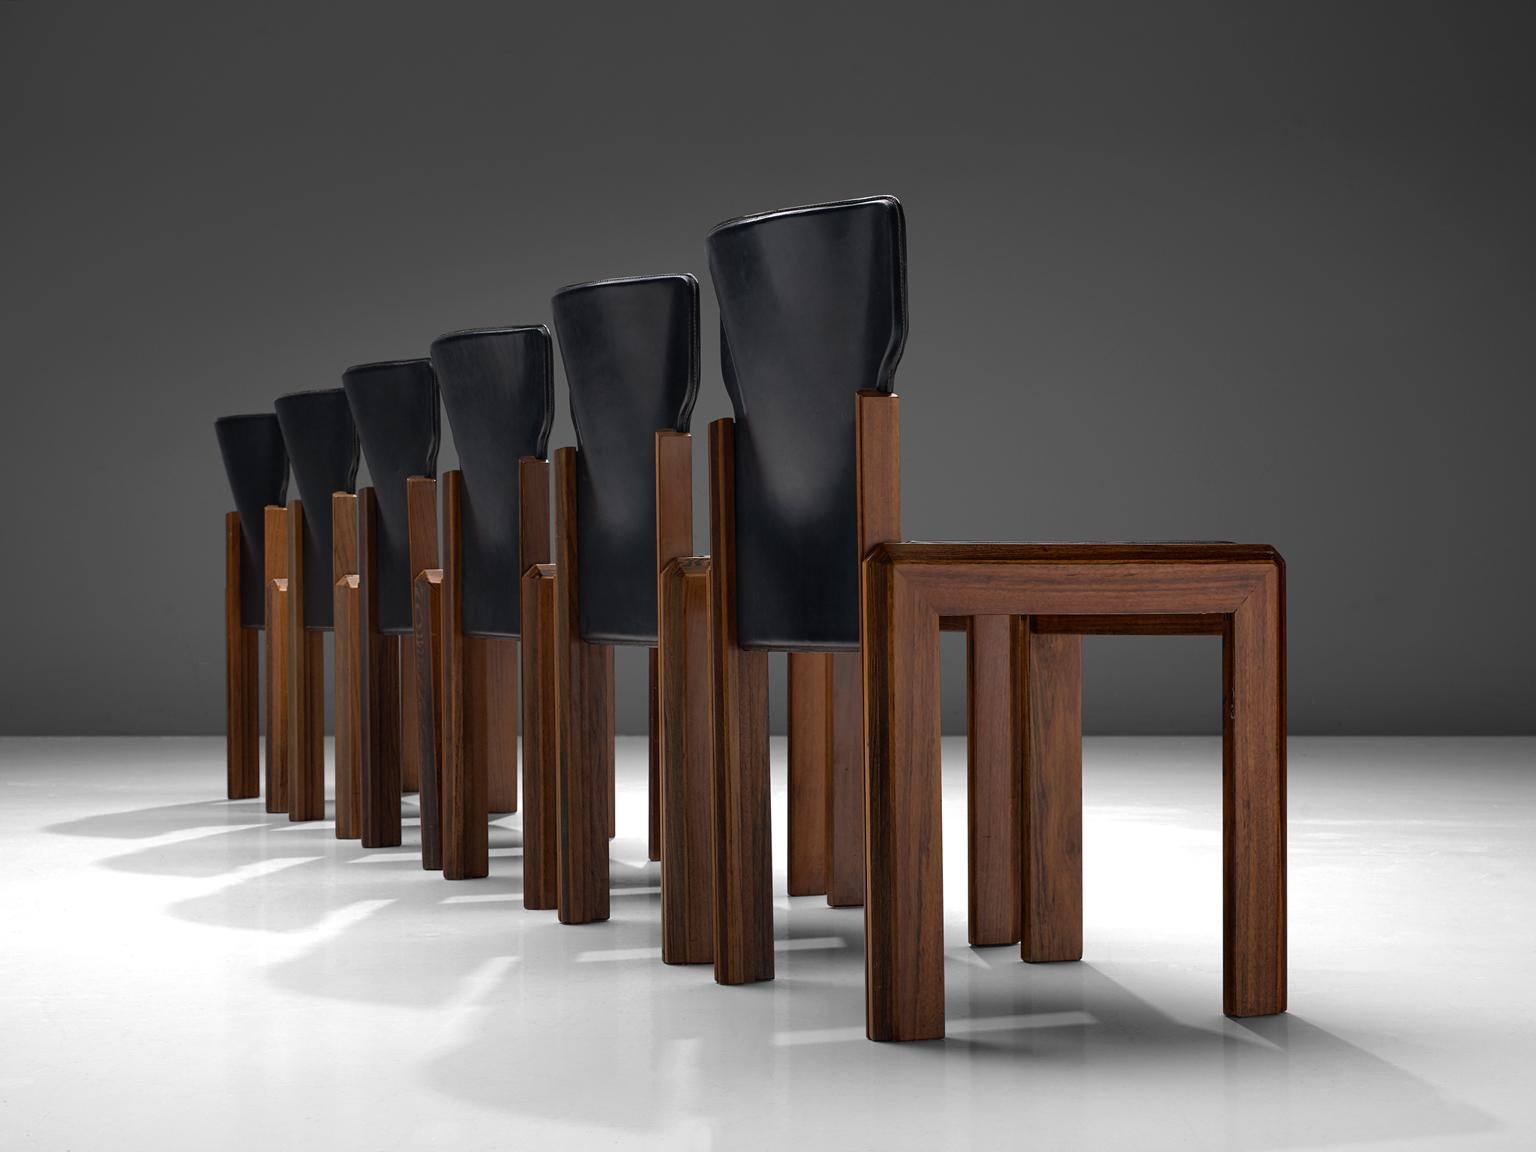 Luciano Frigerio, set of six leather 'Pagani' chairs in various woods, Italy, circa 1975

These chairs are built up of a frame with laminated, marqueterie of noble woods. The chairs have a dent seat and bac. These stylistic choices result in a more